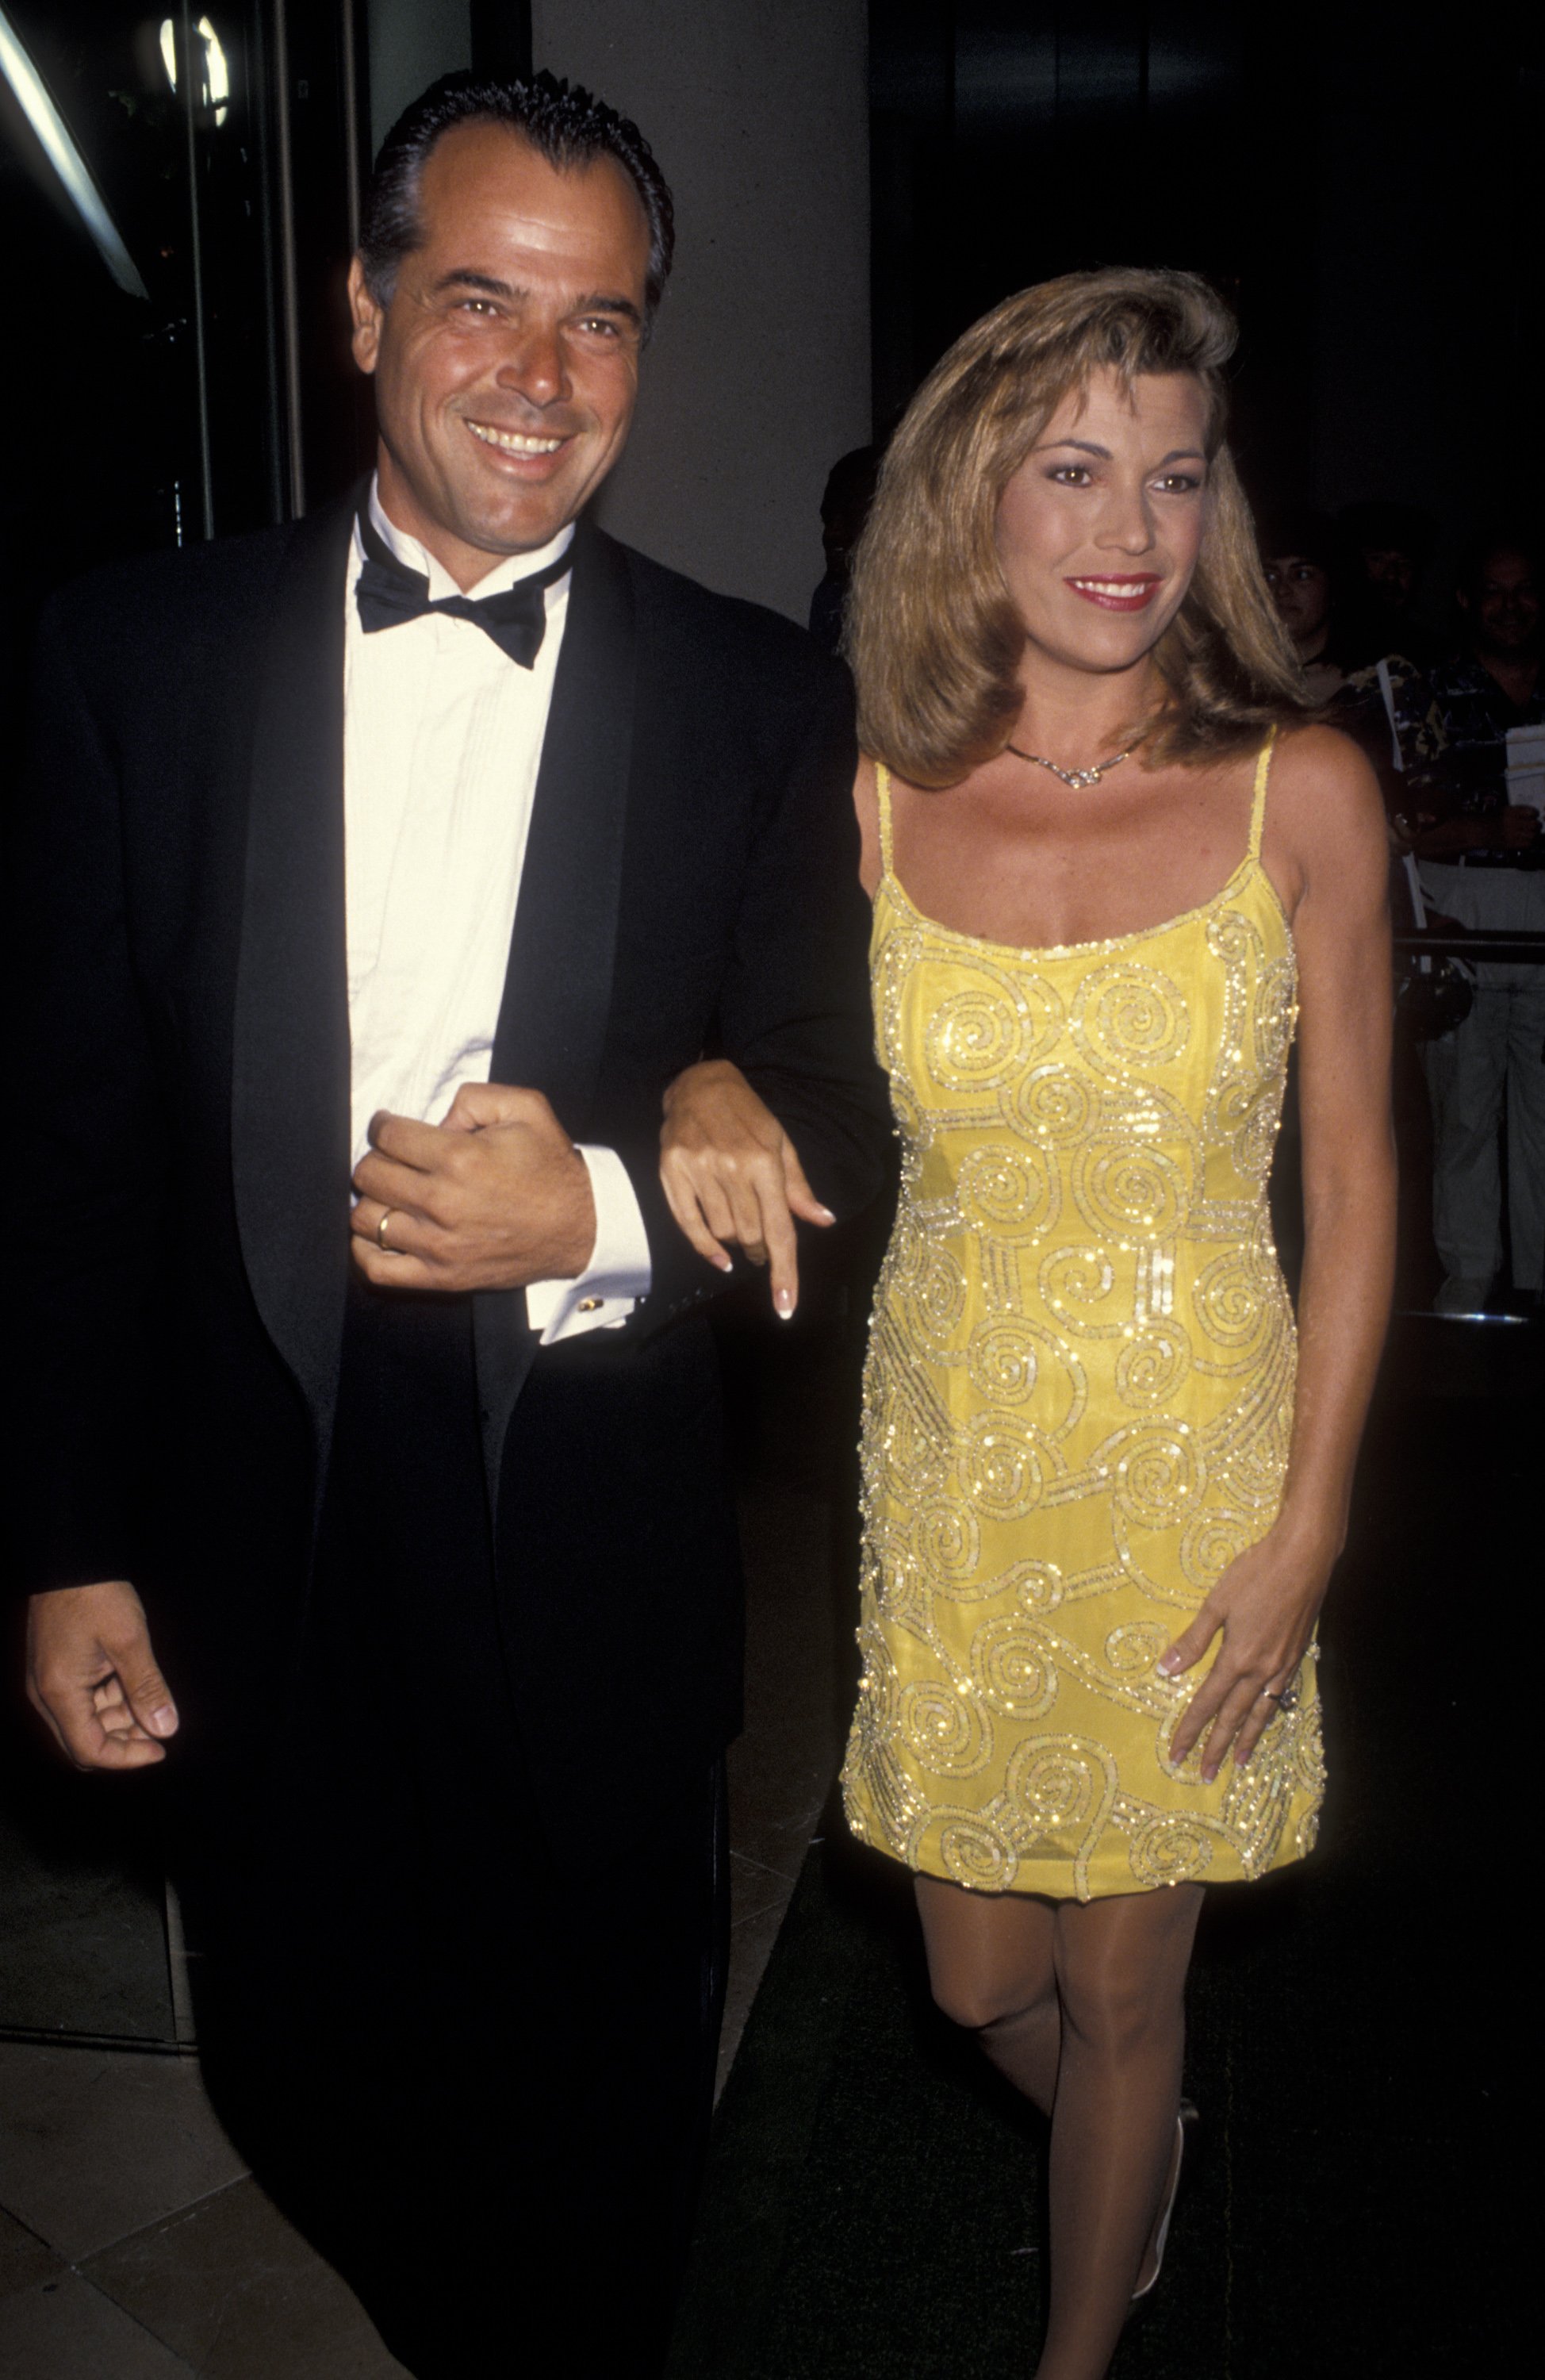 Vanna White and her husband George Santo Pietro during the taping of "NBC Special-Comedy Hall of Fame" at the Beverly Hilton Hotel on August 29, 1993 in Beverly Hills, California. / Source: Getty Images